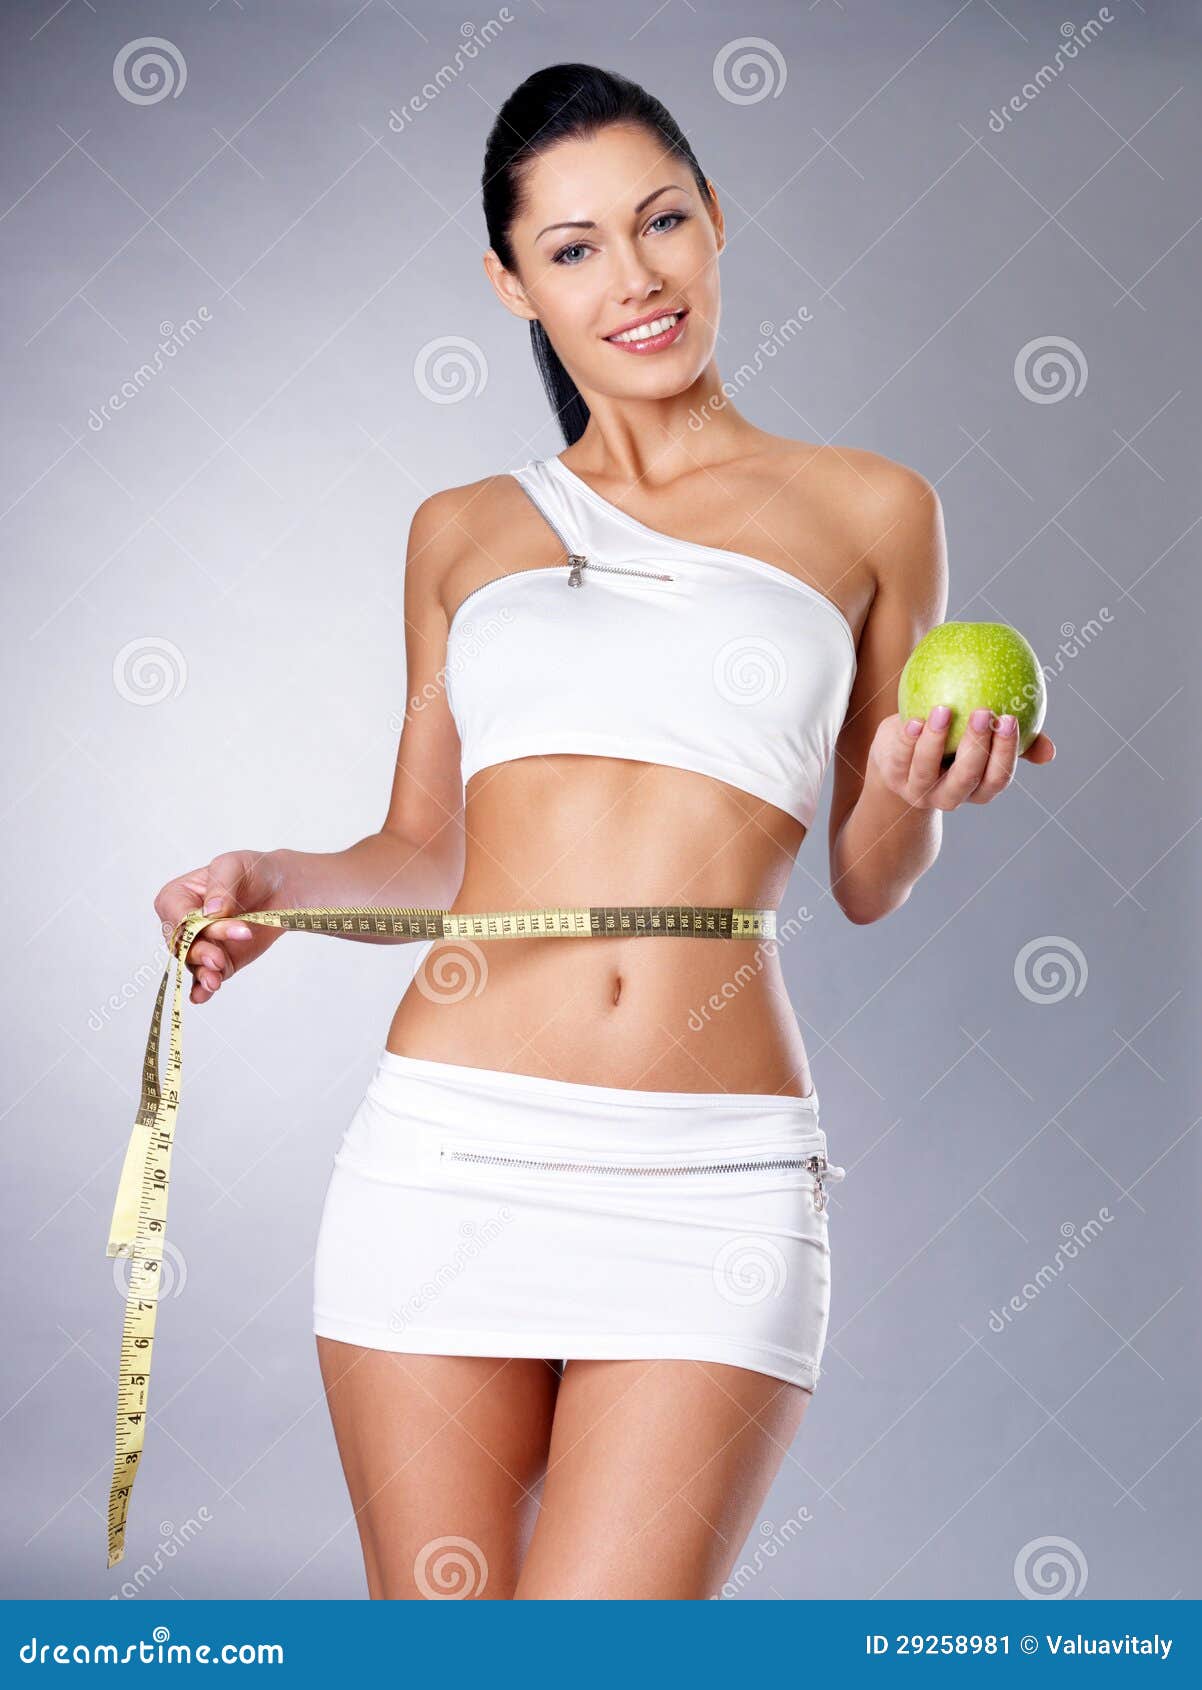 50,594 Slimming Woman Stock Photos - Free & Royalty-Free Stock Photos from  Dreamstime